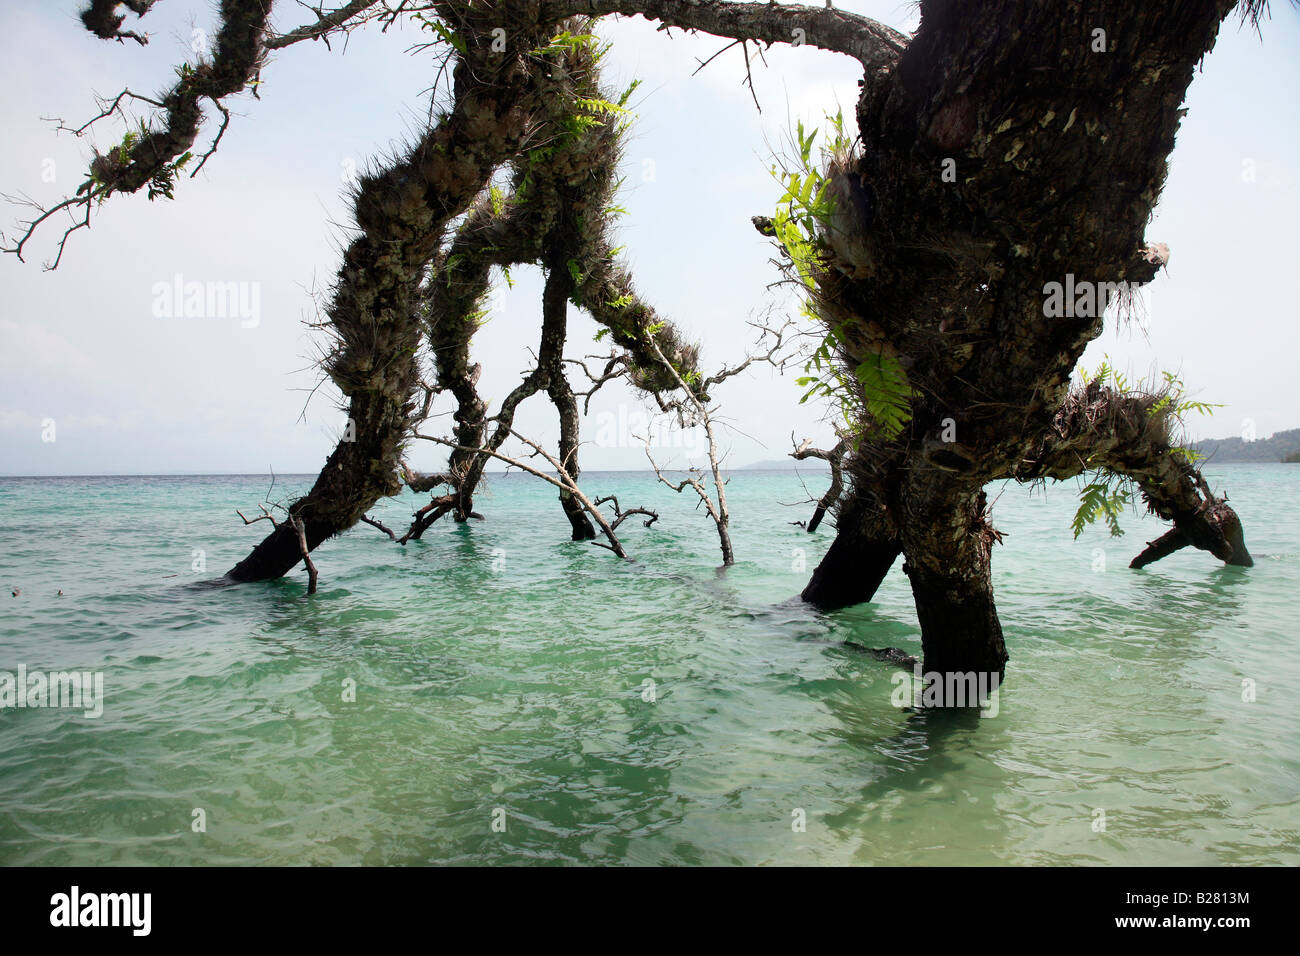 Tree branches are touching the sea water at Havelock,island,Andaman,India Stock Photo